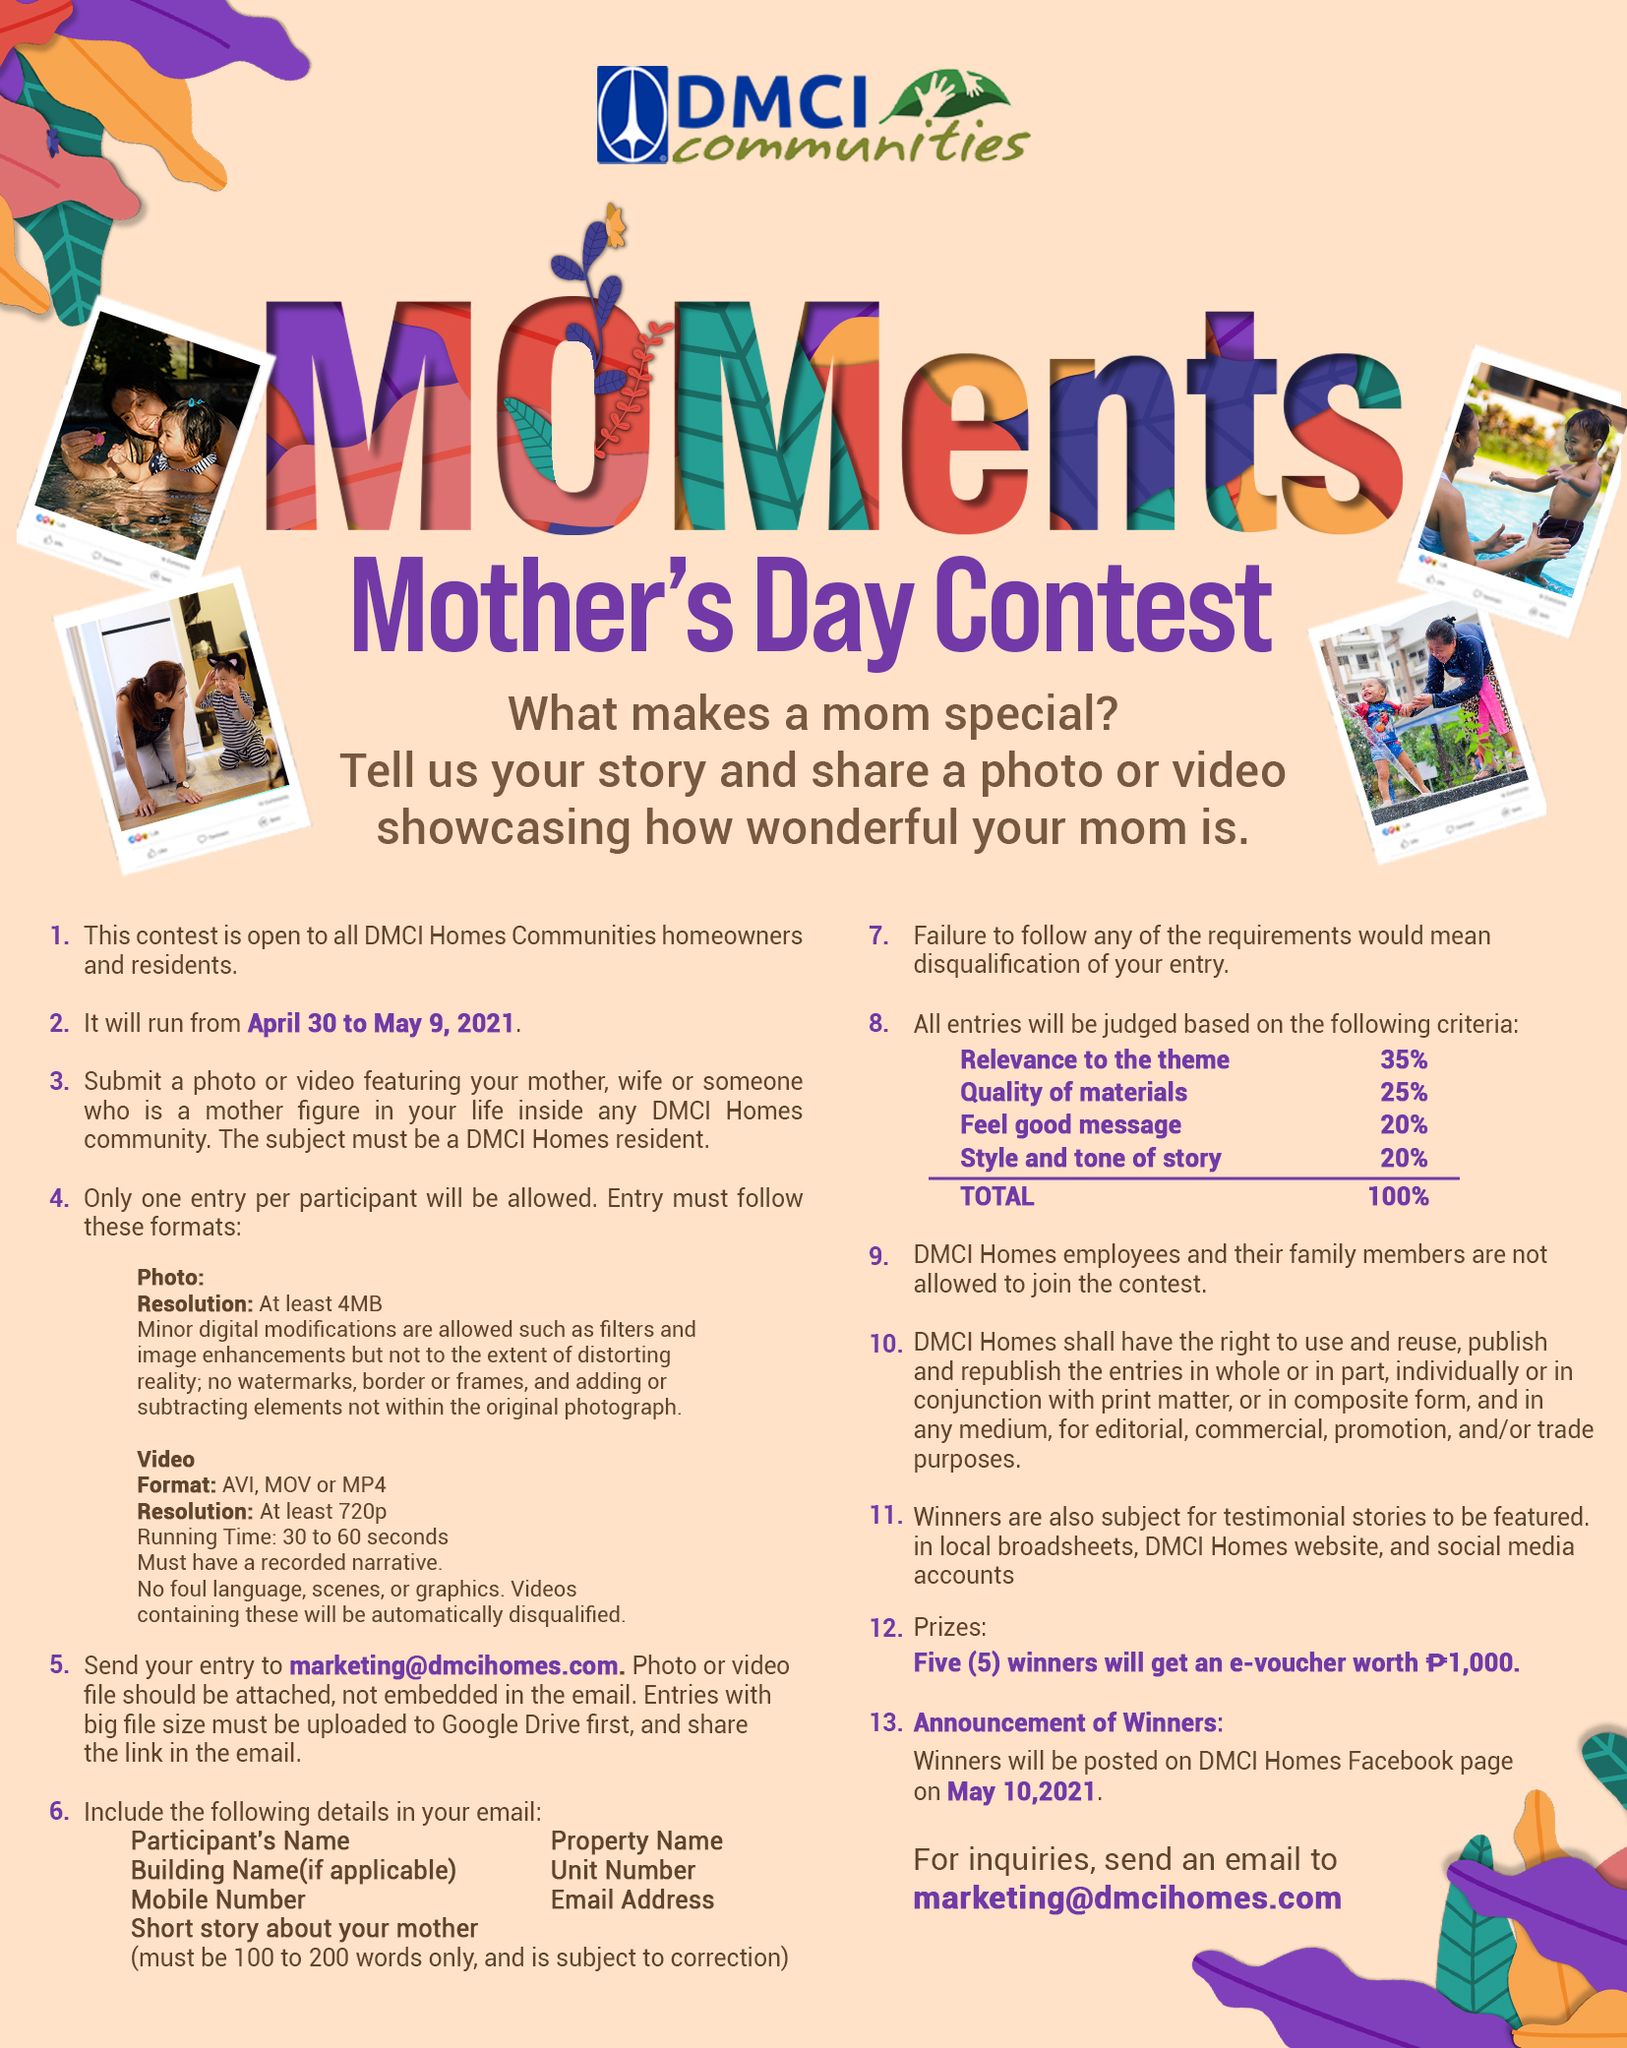 dmci communities Mother’s Day Contest 2021